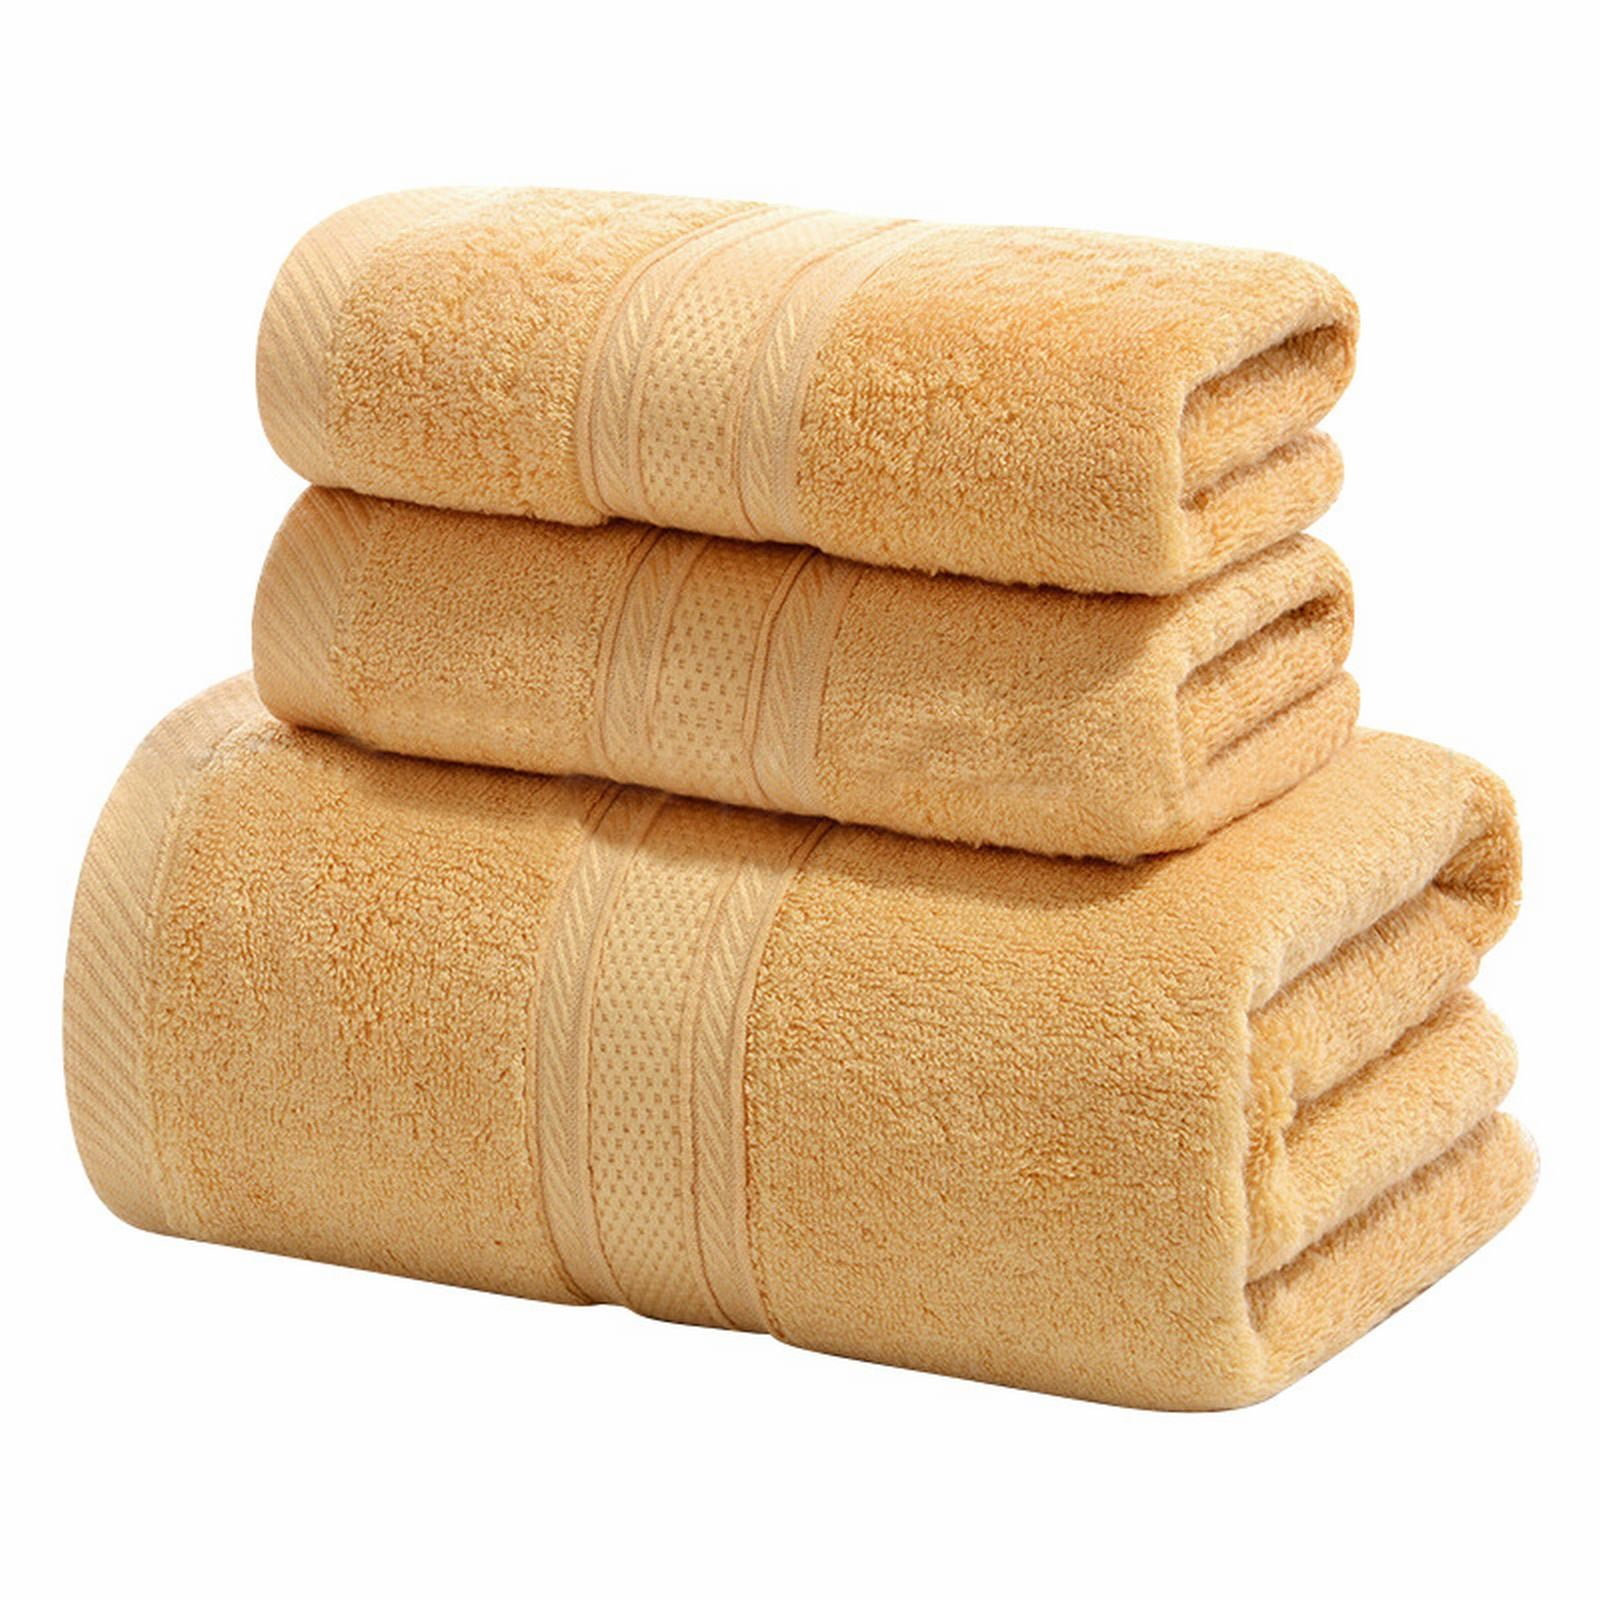 Pack of Towels Bath K25 Bath Towel Towels 3 Piece Towel Set 1 Bath Towels 2  Hand Towels 600 GSM Ring Spun Cotton Highly Absorbent Towels For Pretty